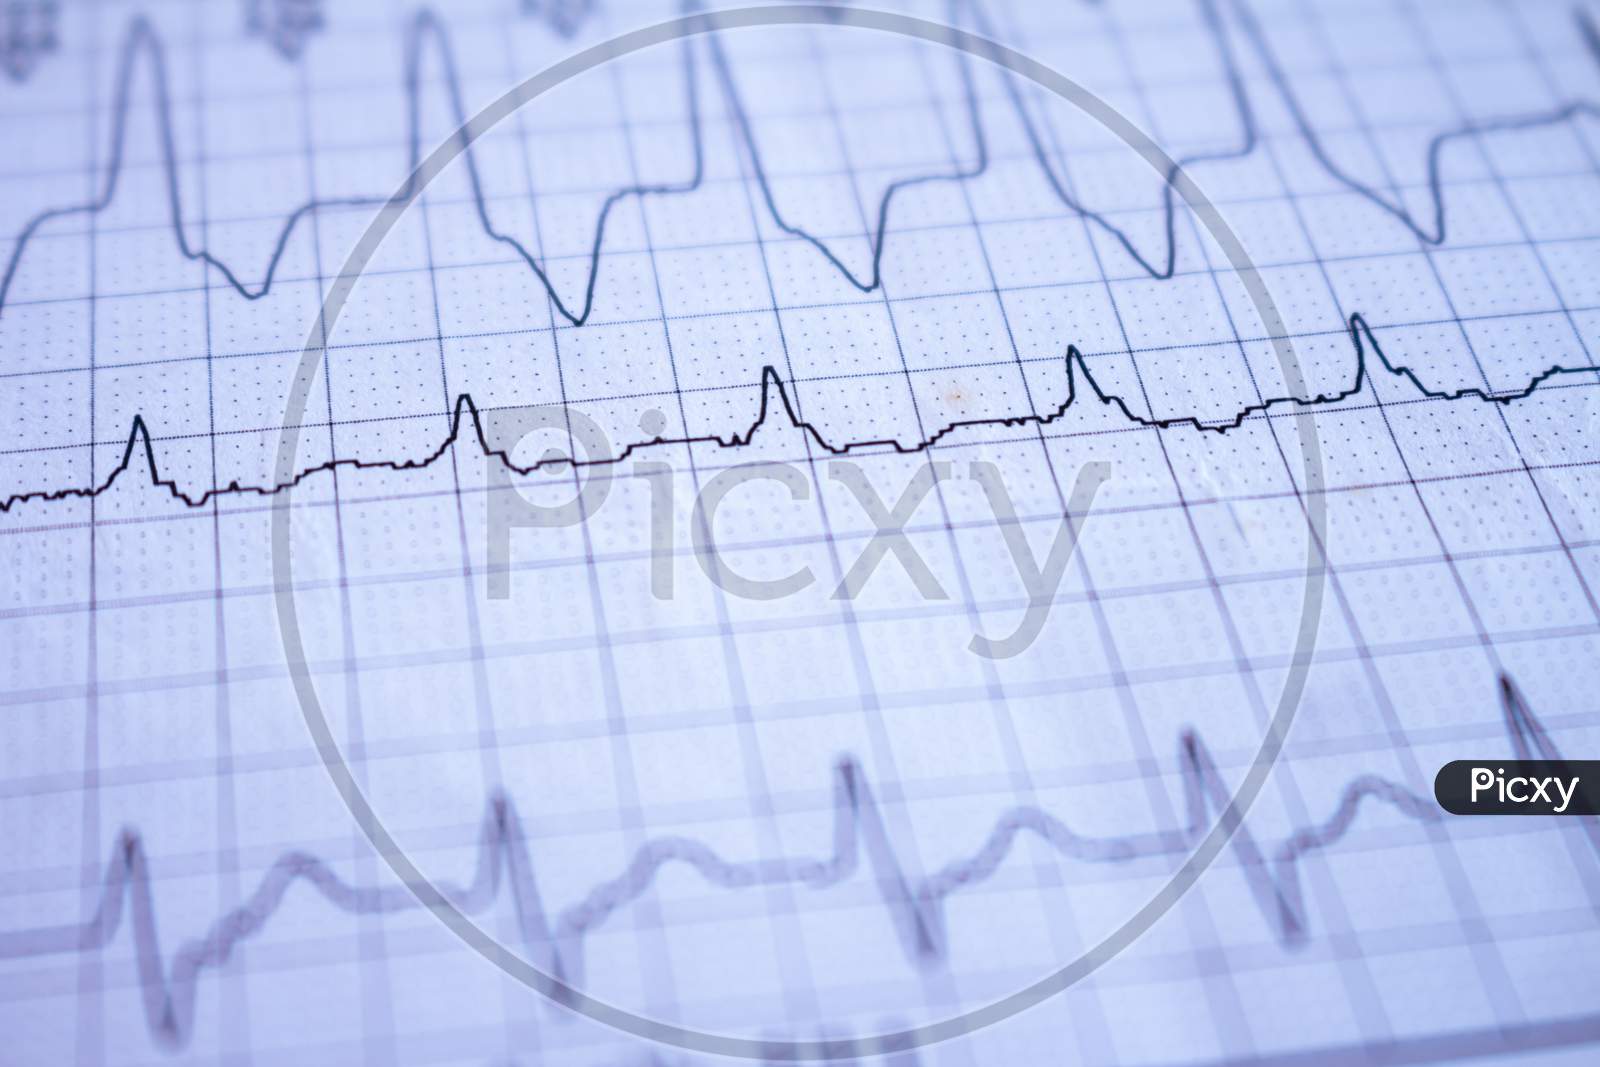 Close-Up On An Electrocardiogram. Heartbeat Written On Paper. Study Of The Heart.